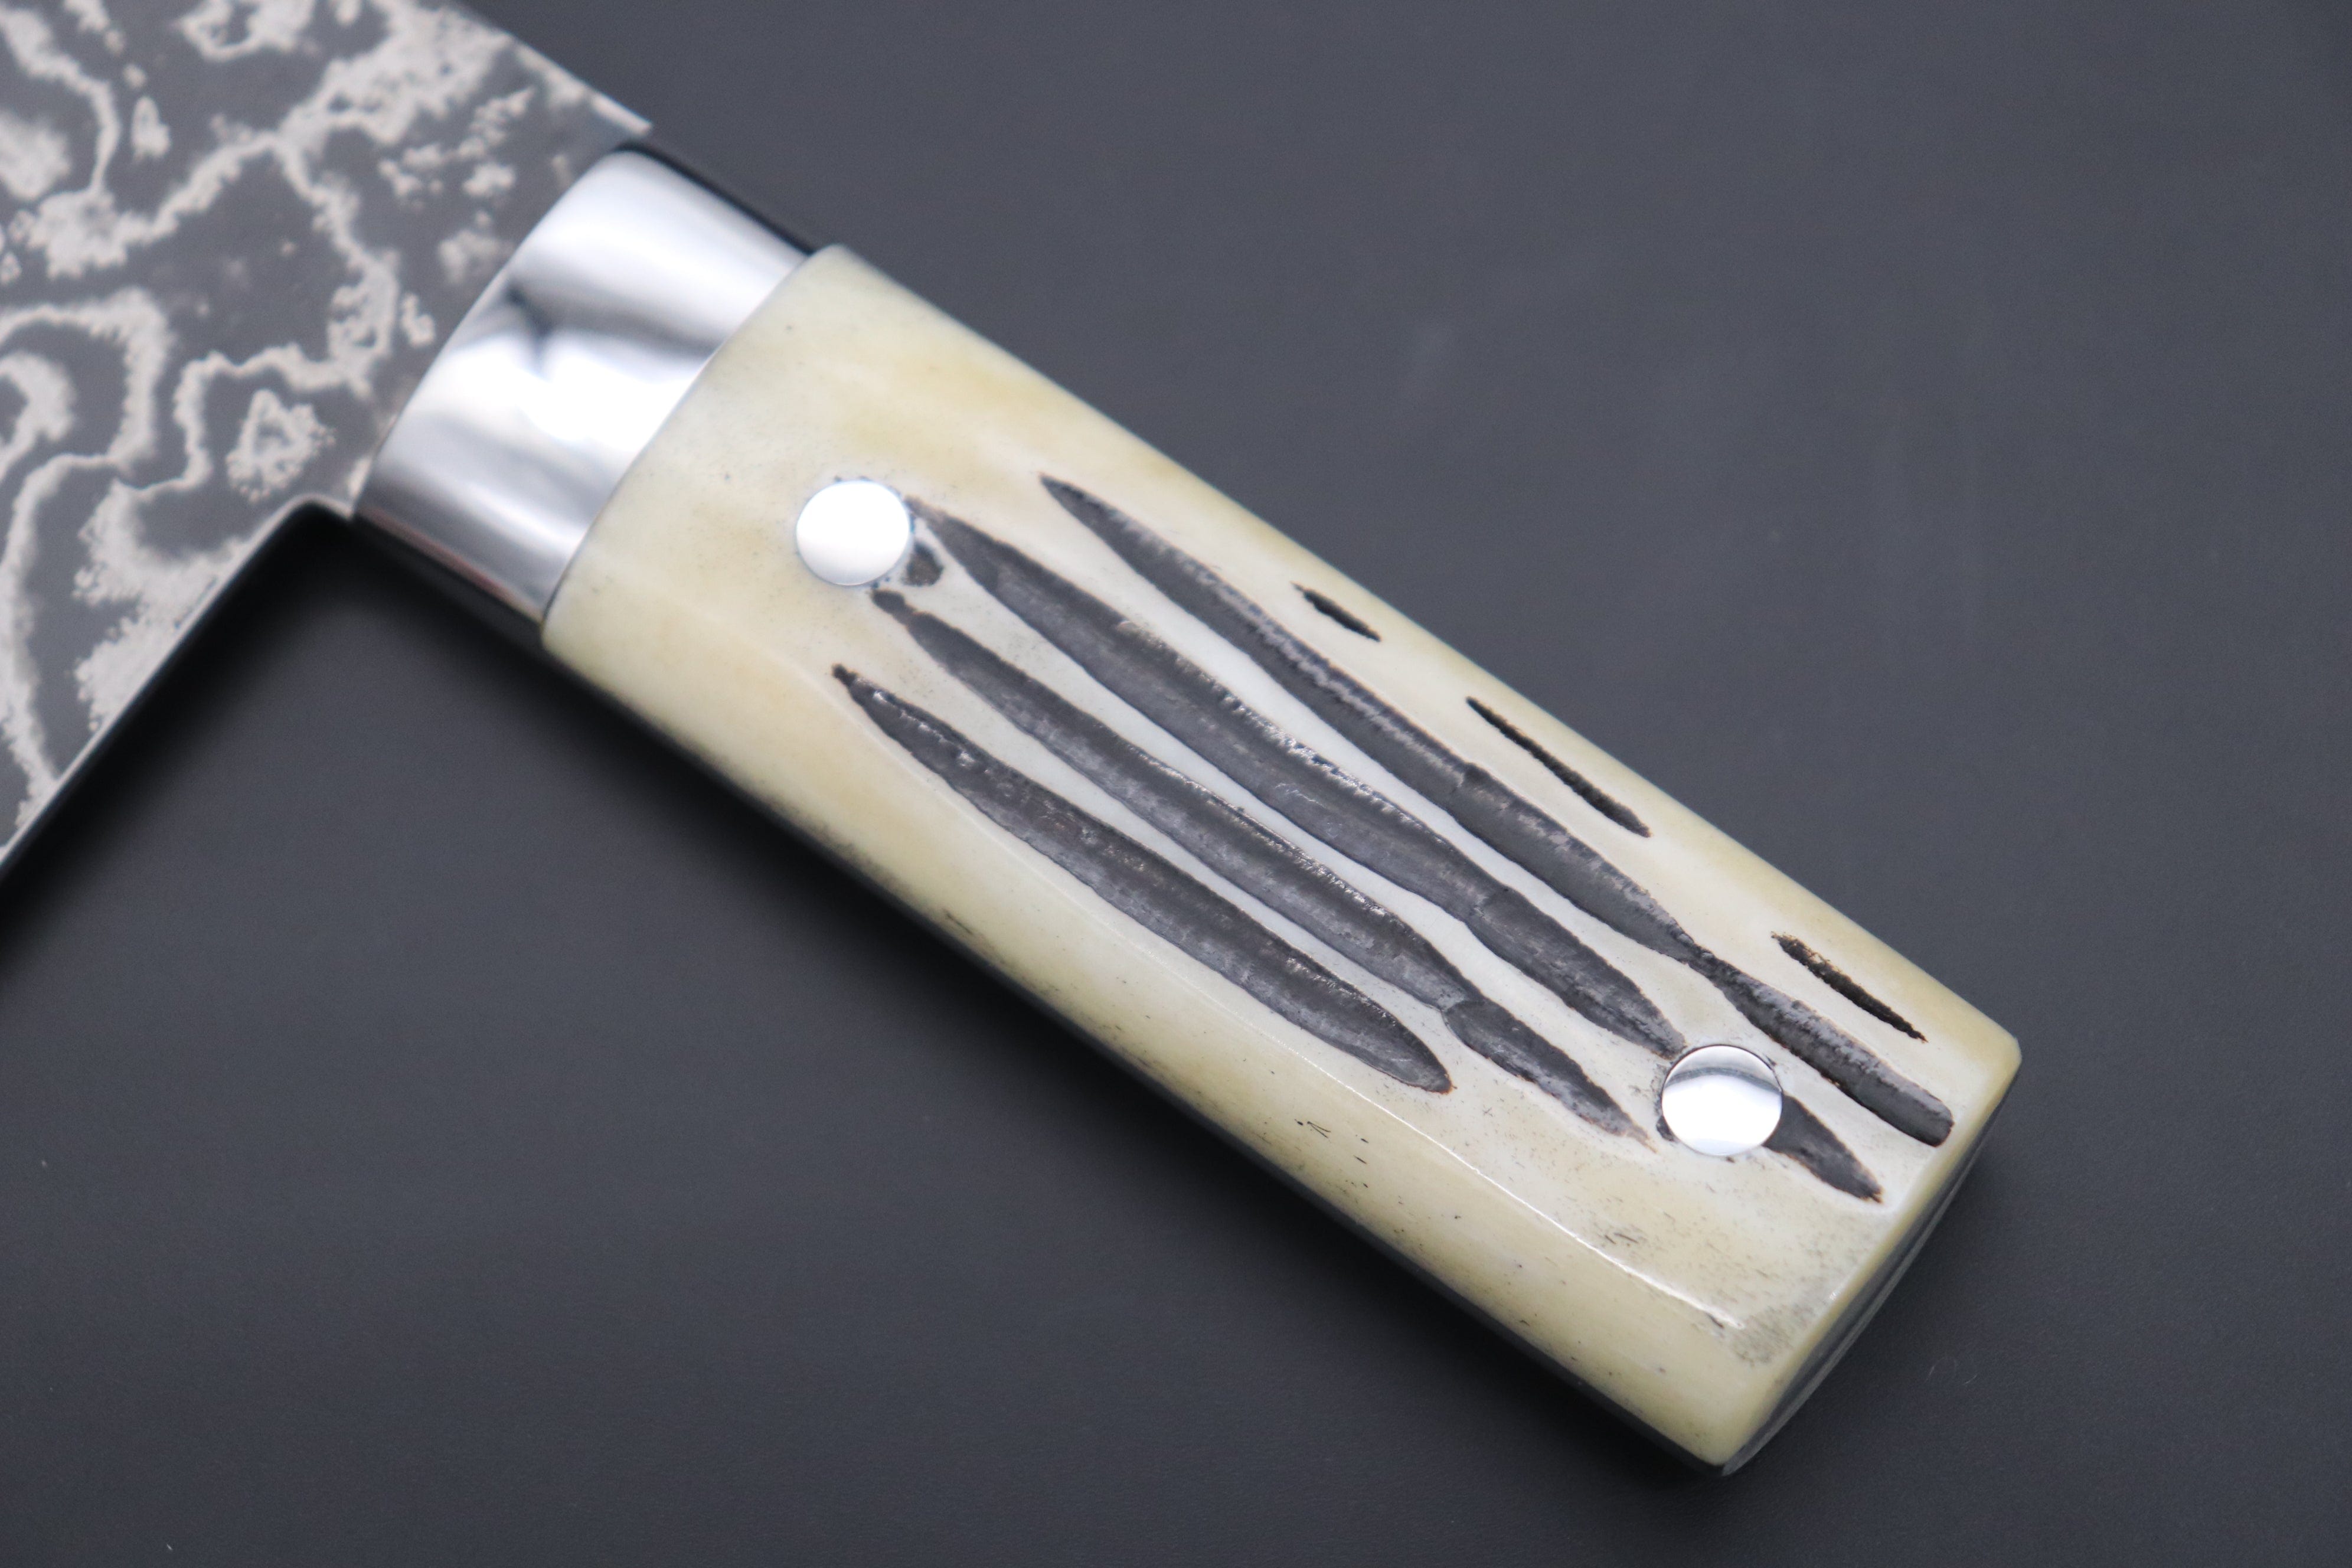 Takeshi Saji VG10 Black Damascus DHW Japanese Chef's Chinese Cooking Knife  220mm with White Antler Handle